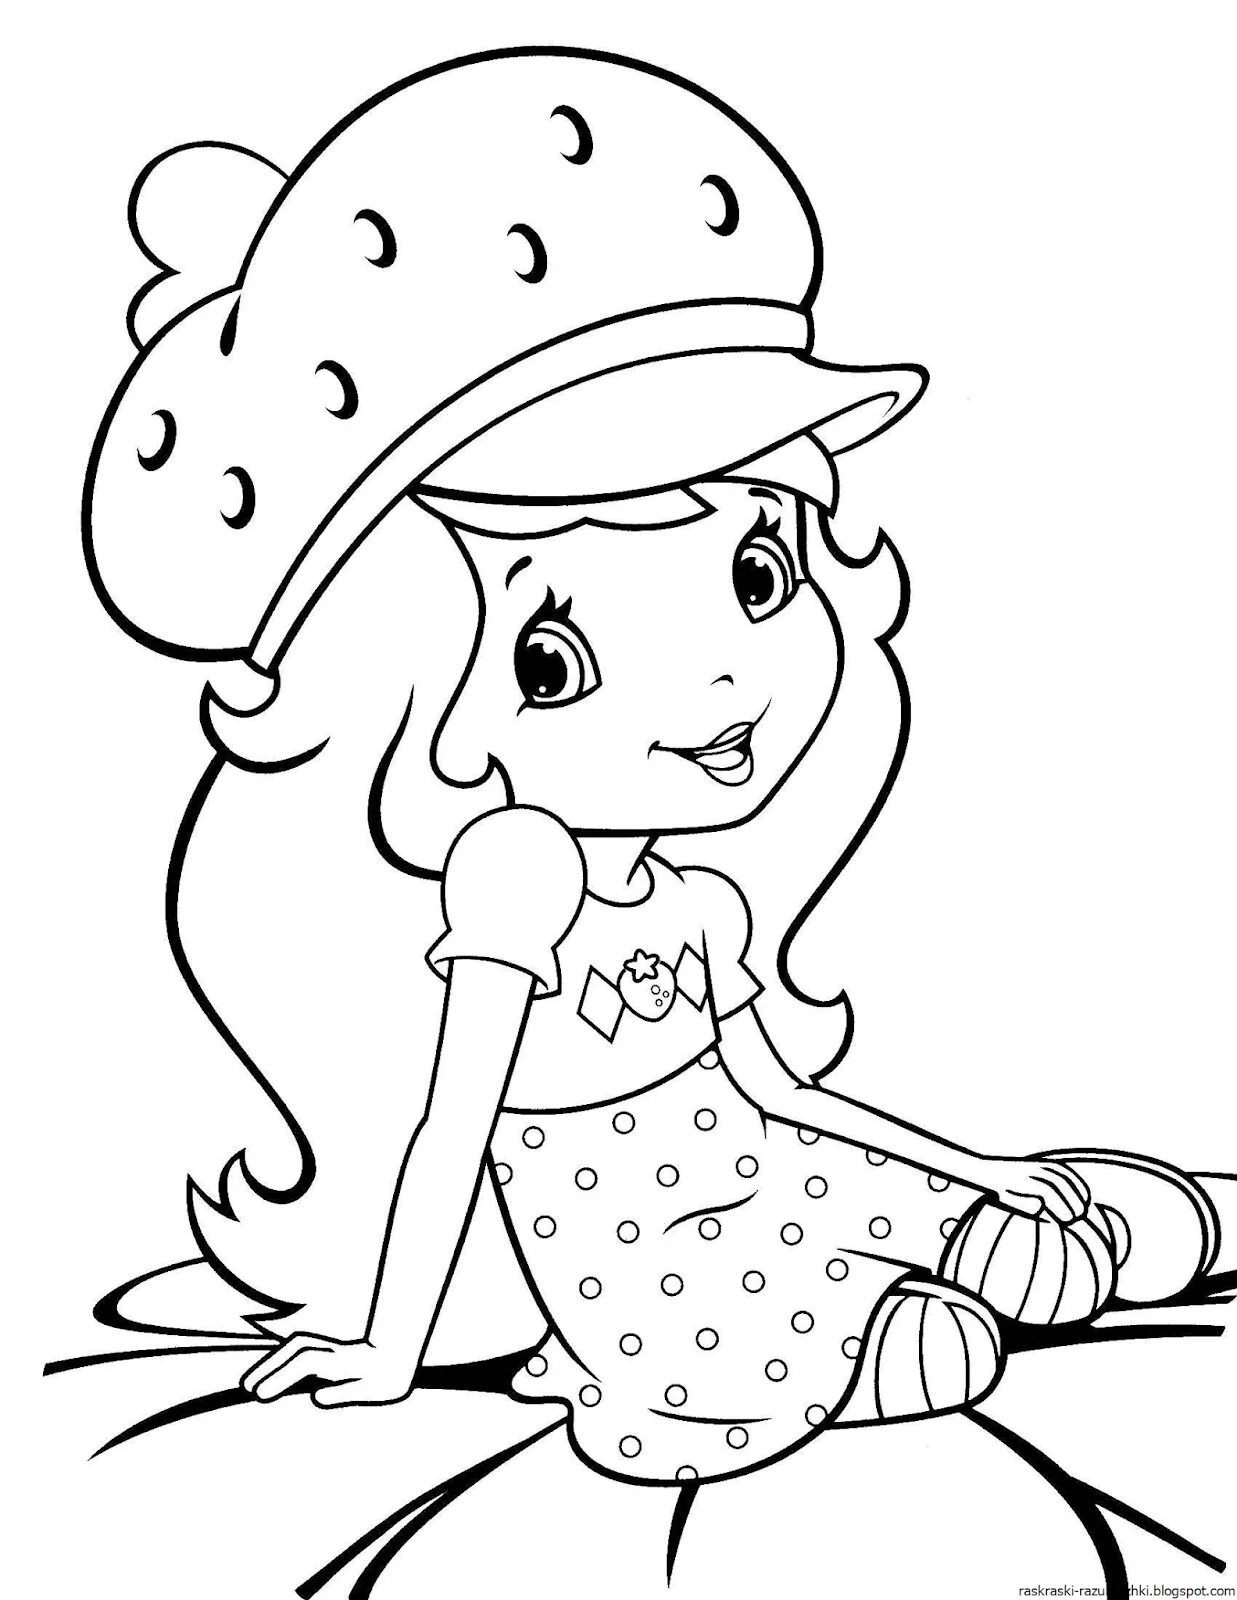 Great coloring page 6 for girls